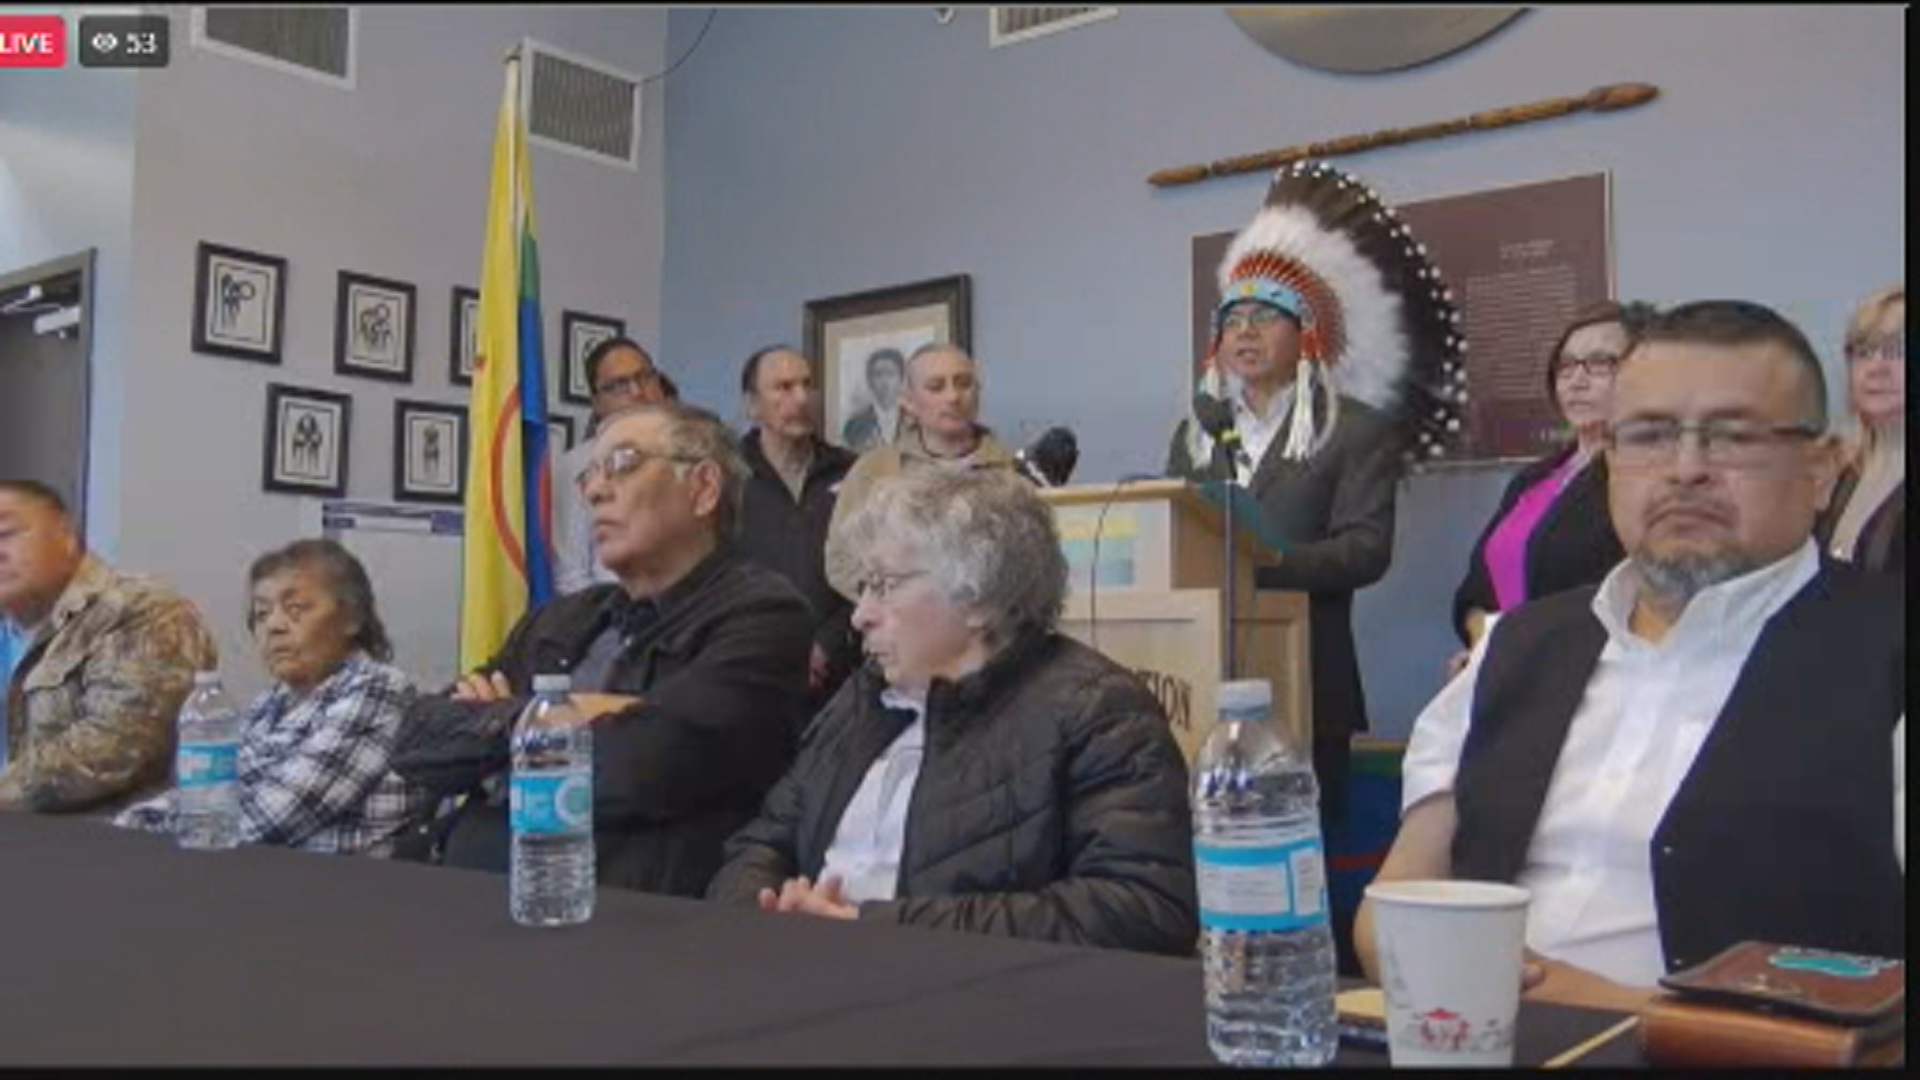 Ongoing health crisis: Peguis First Nation declares state of emergency - Winnipeg